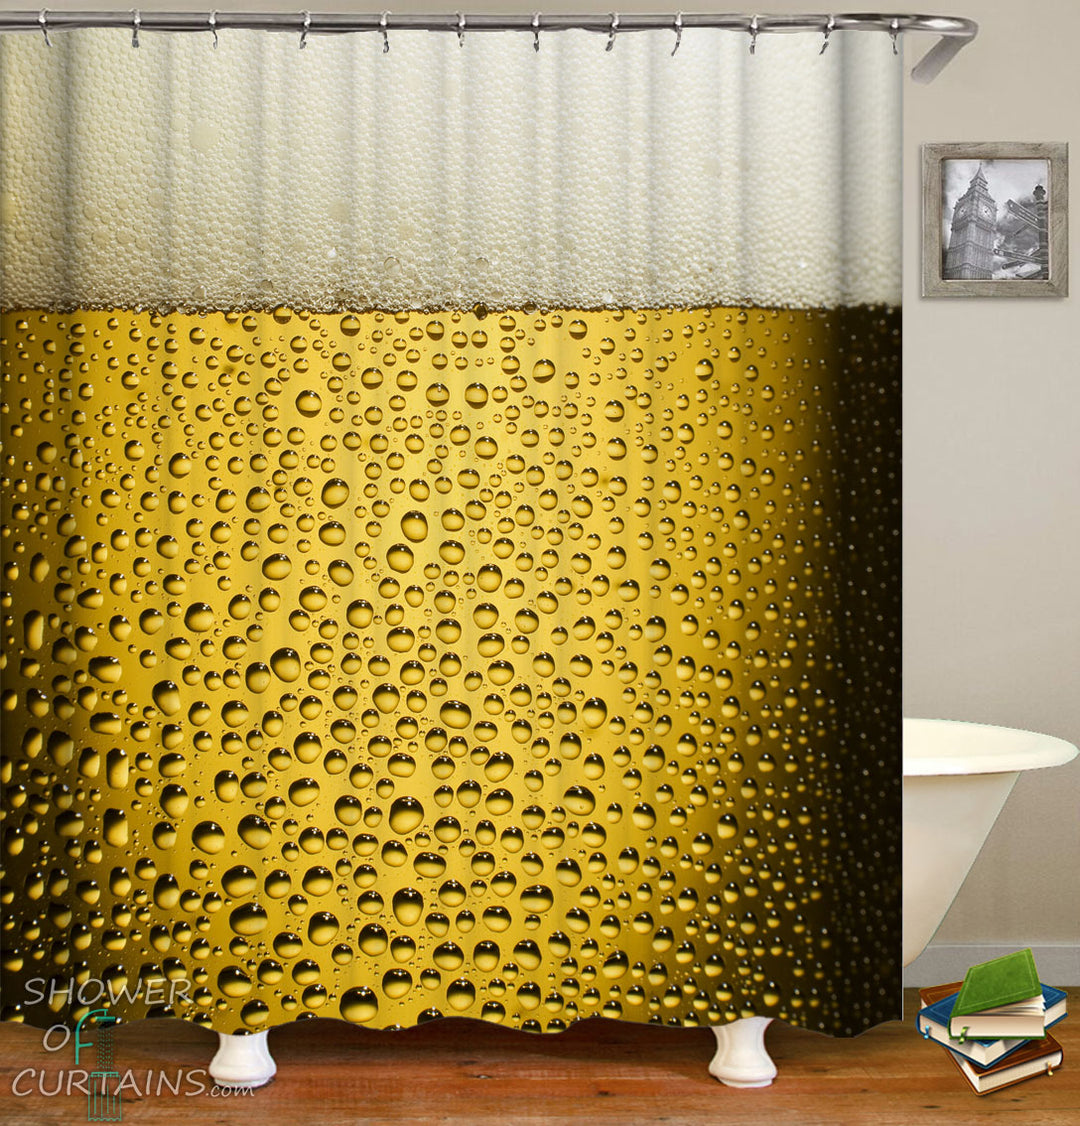 Ice Cold Beer Shower Curtain - Cool Shower Curtains